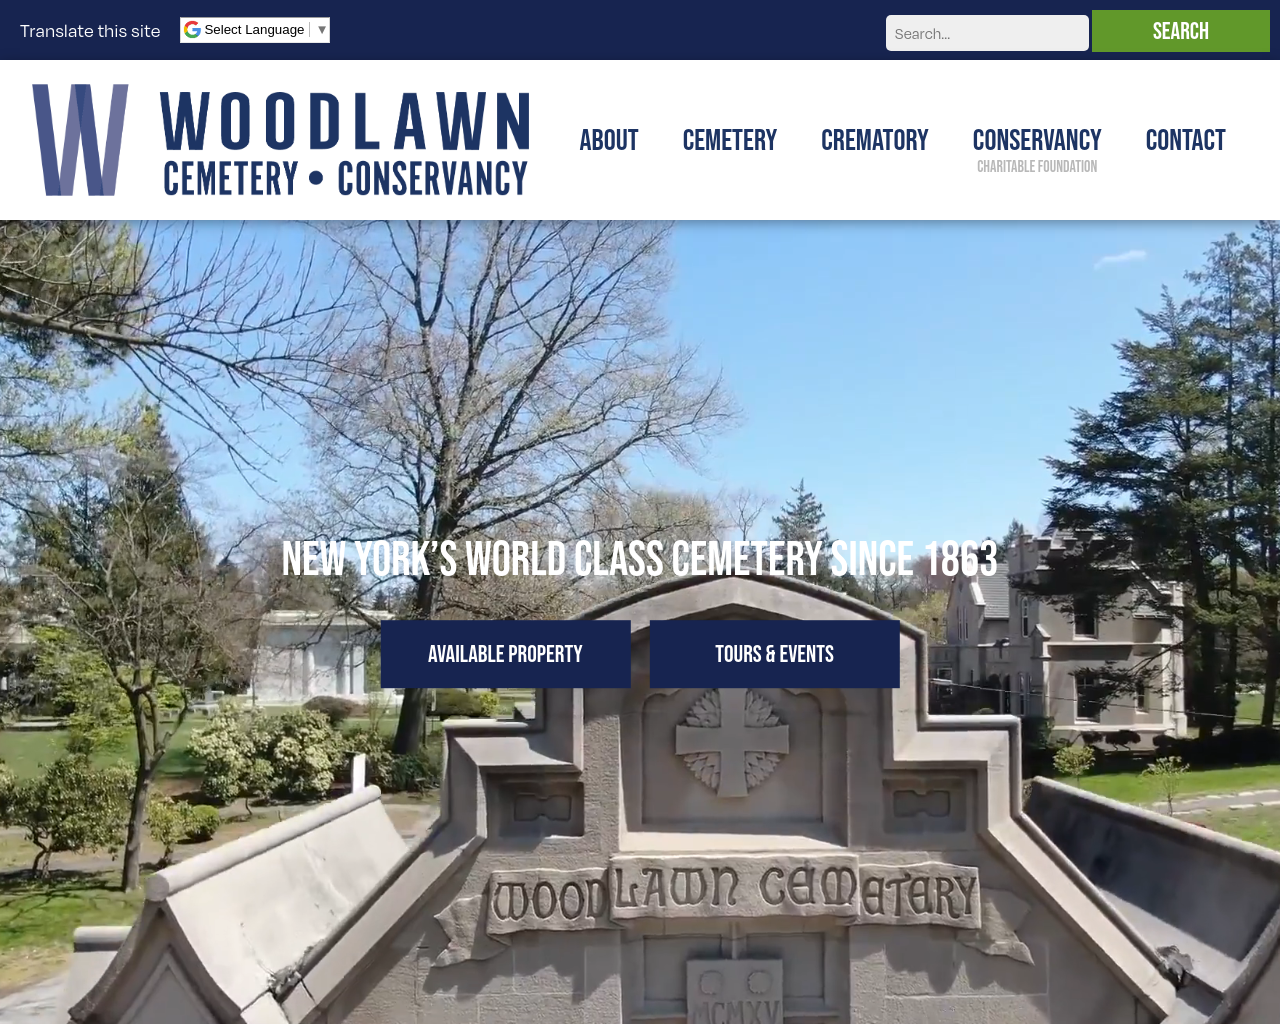 thewoodlawncemetery.org